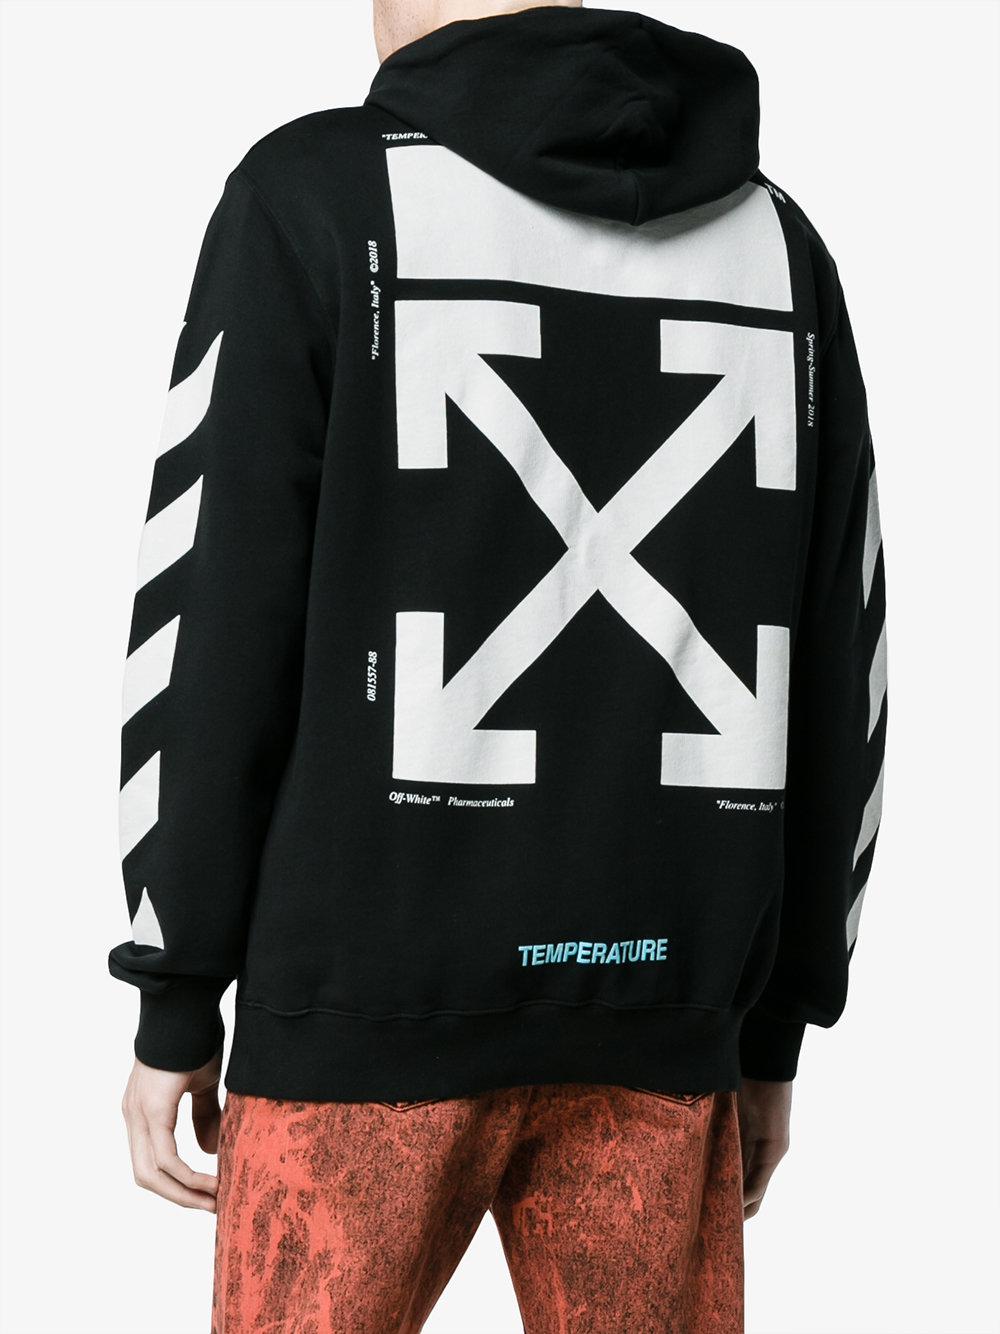 Off White Mona Lisa Temperature Hoodie Online Sale, UP TO 50% OFF